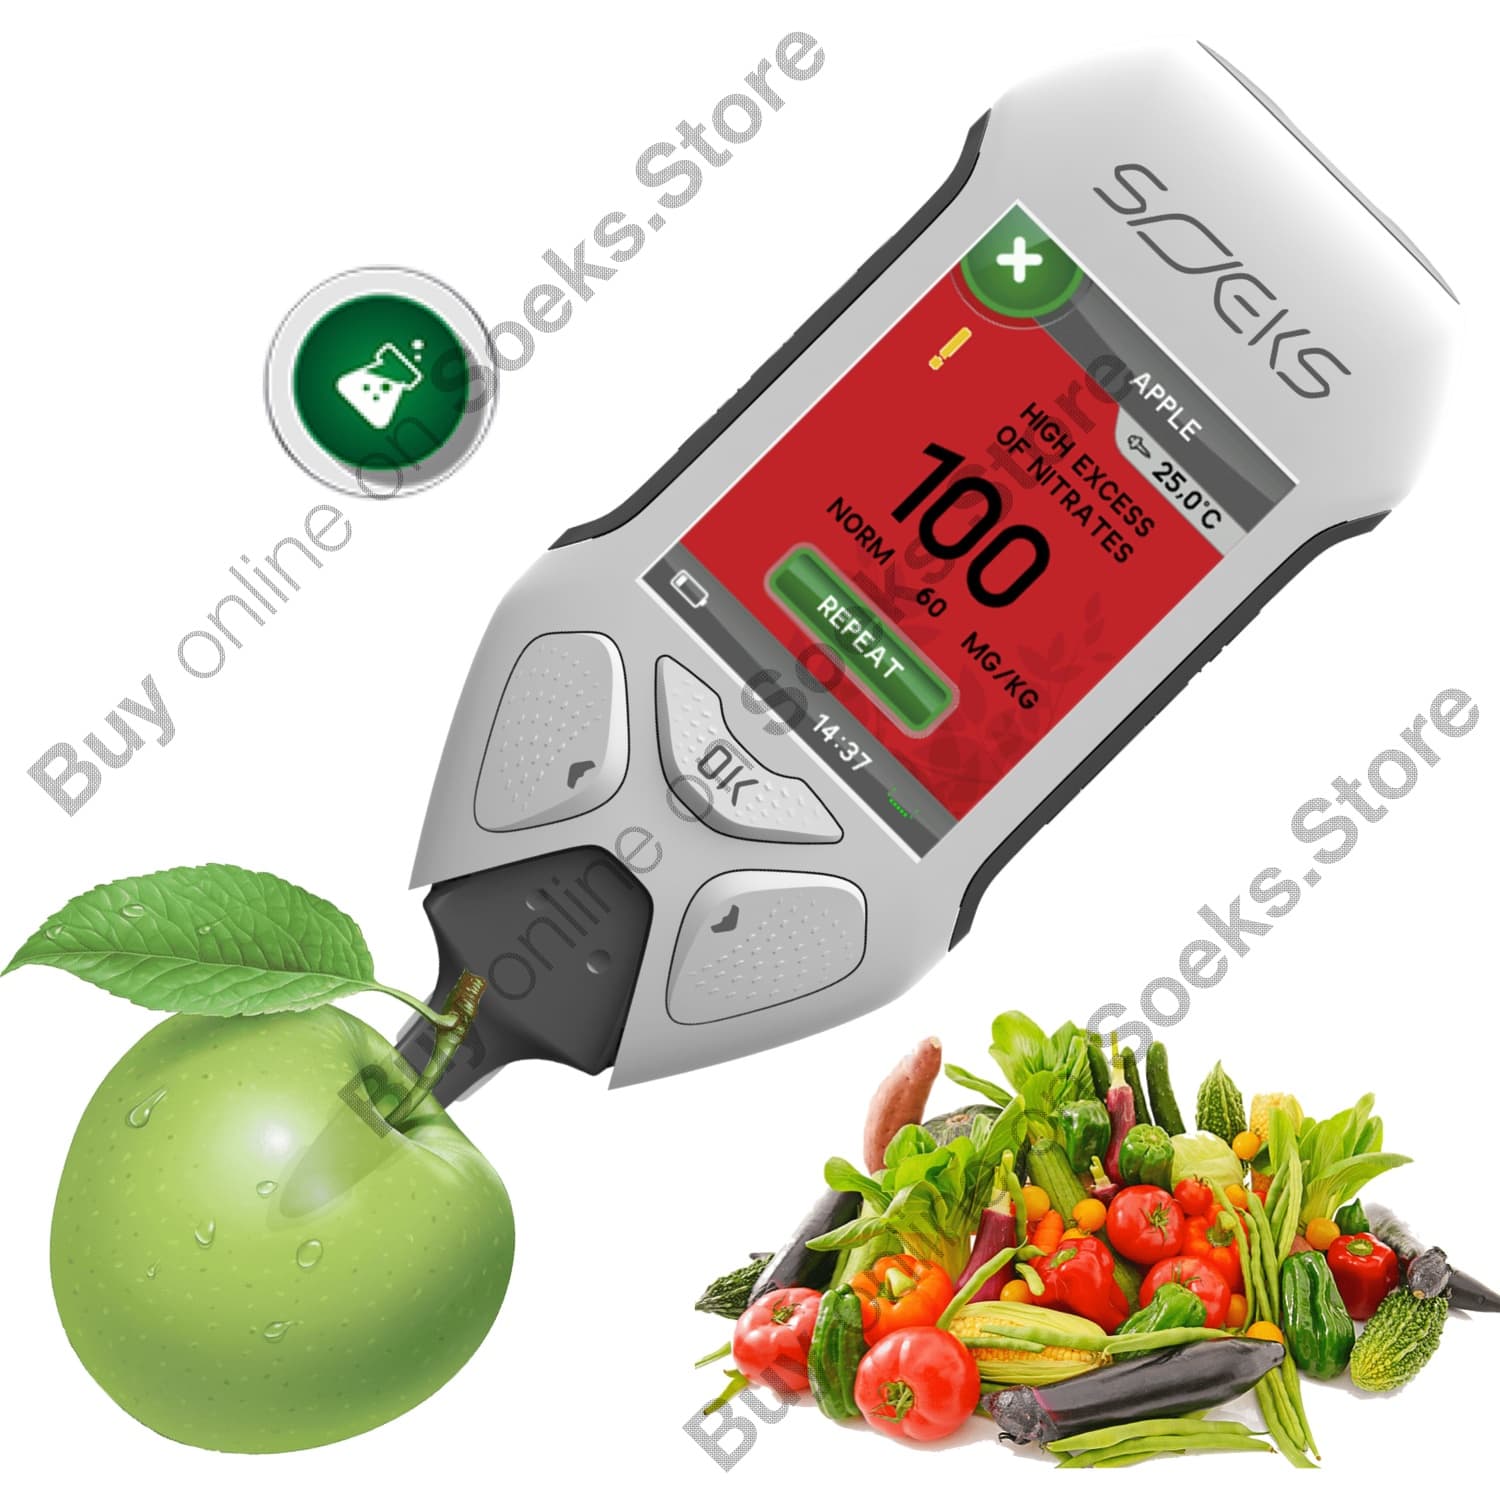 EcoVisor F4 - Measure nitrate levels in vegetables and fruits (Nitrate Tester)